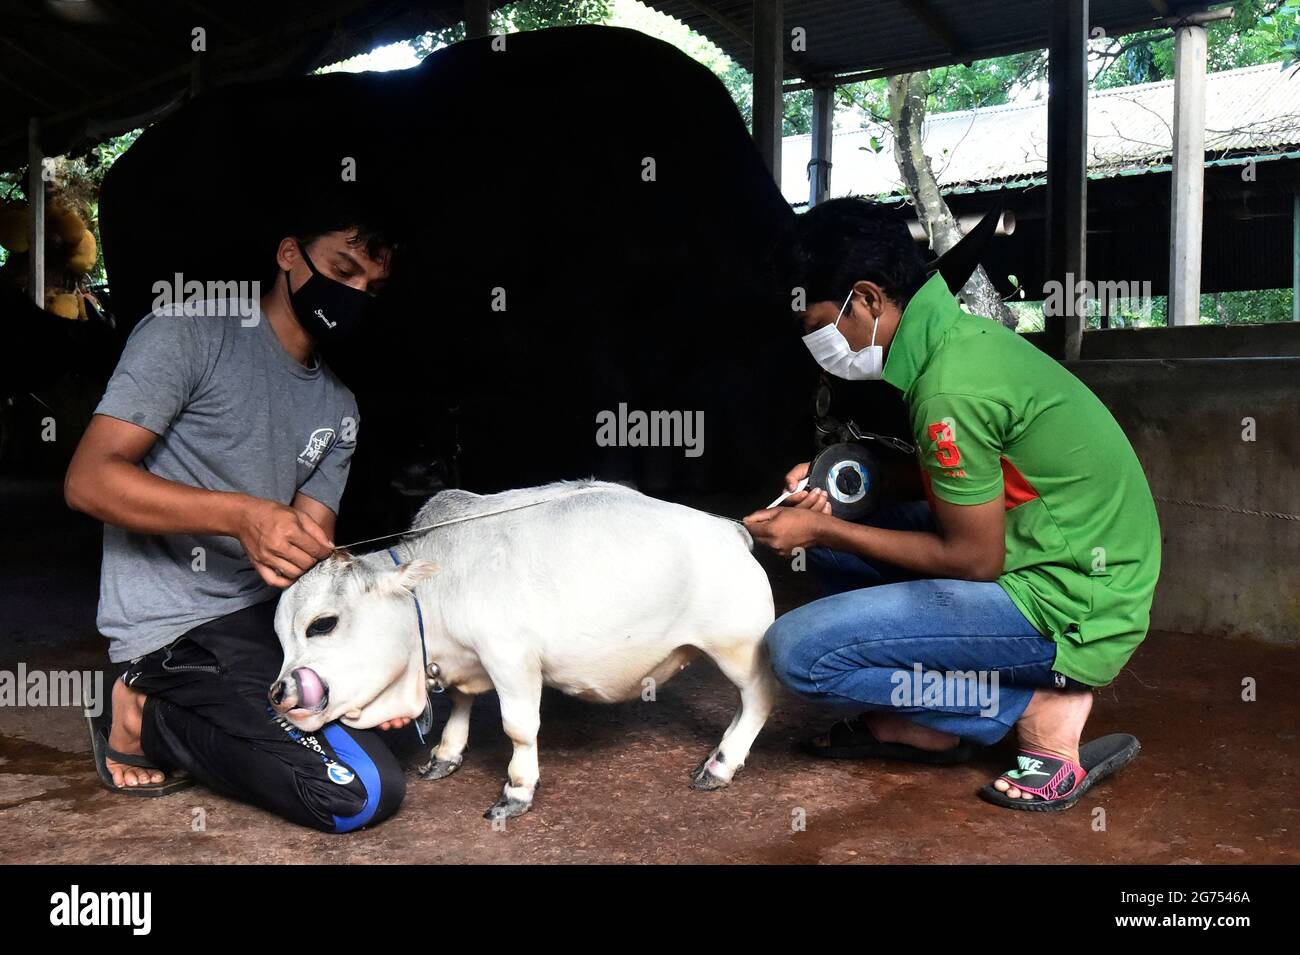 (210711) -- SAVAR, July 11, 2021 (Xinhua) -- Two men measure a dwarf cow called Rani at a farm in Savar on the outskirts of Dhaka, Bangladesh, July 8, 2021.  The 26-inch long, 26-kg weigh cow called Rani, or Queen, has been applied for the Guinness Book of Records, with its owner claiming it to be the world's smallest cow.   TO GO WITH 'Feature: 'World's smallest' dwarf cow draws crowds in Bangladesh' (Xinhua) Stock Photo